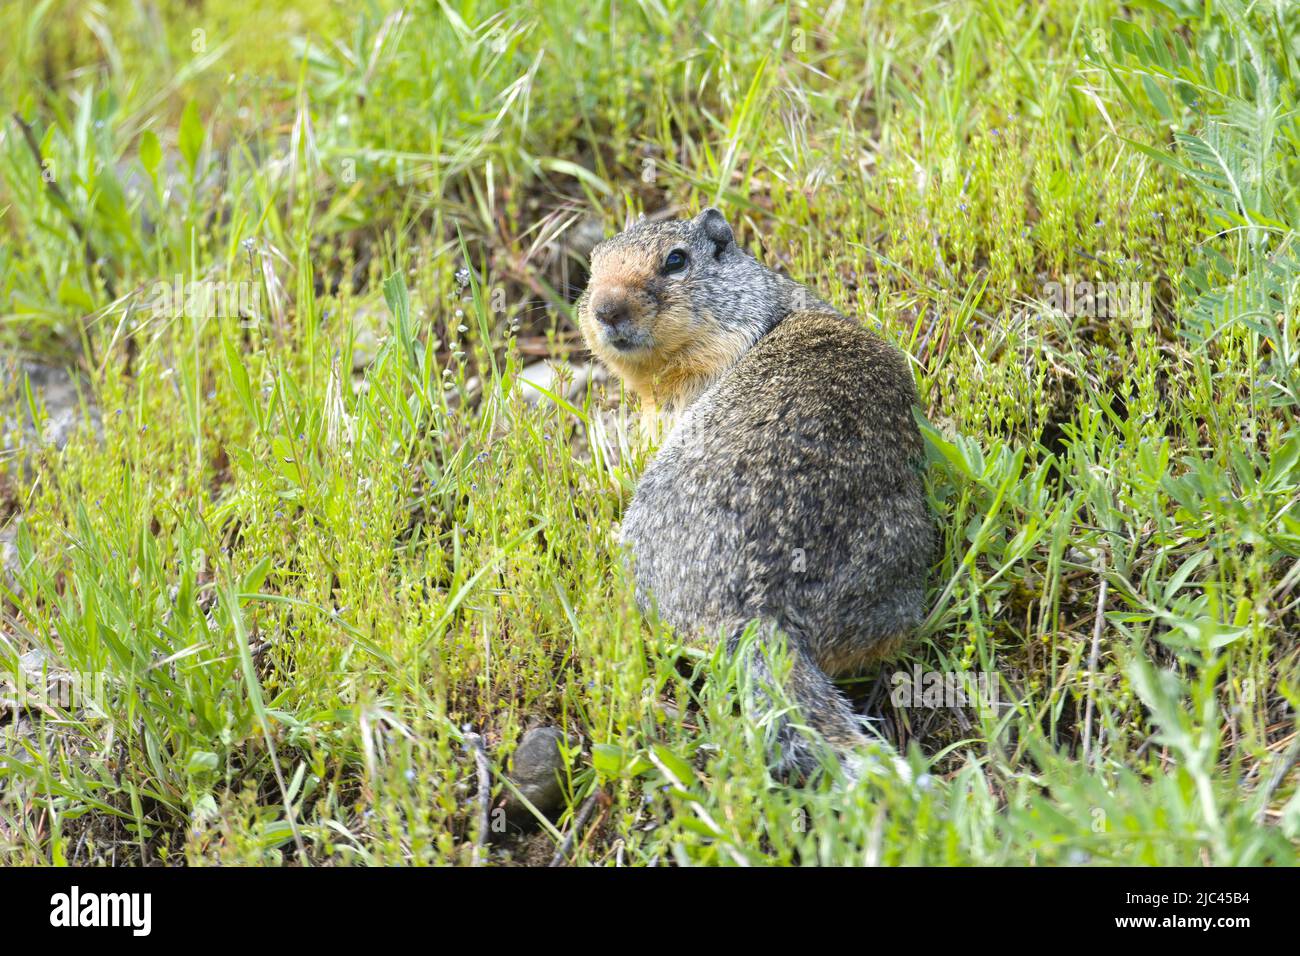 A small furry ground squirrel looking back from a small hill in Athol, Idaho. Stock Photo